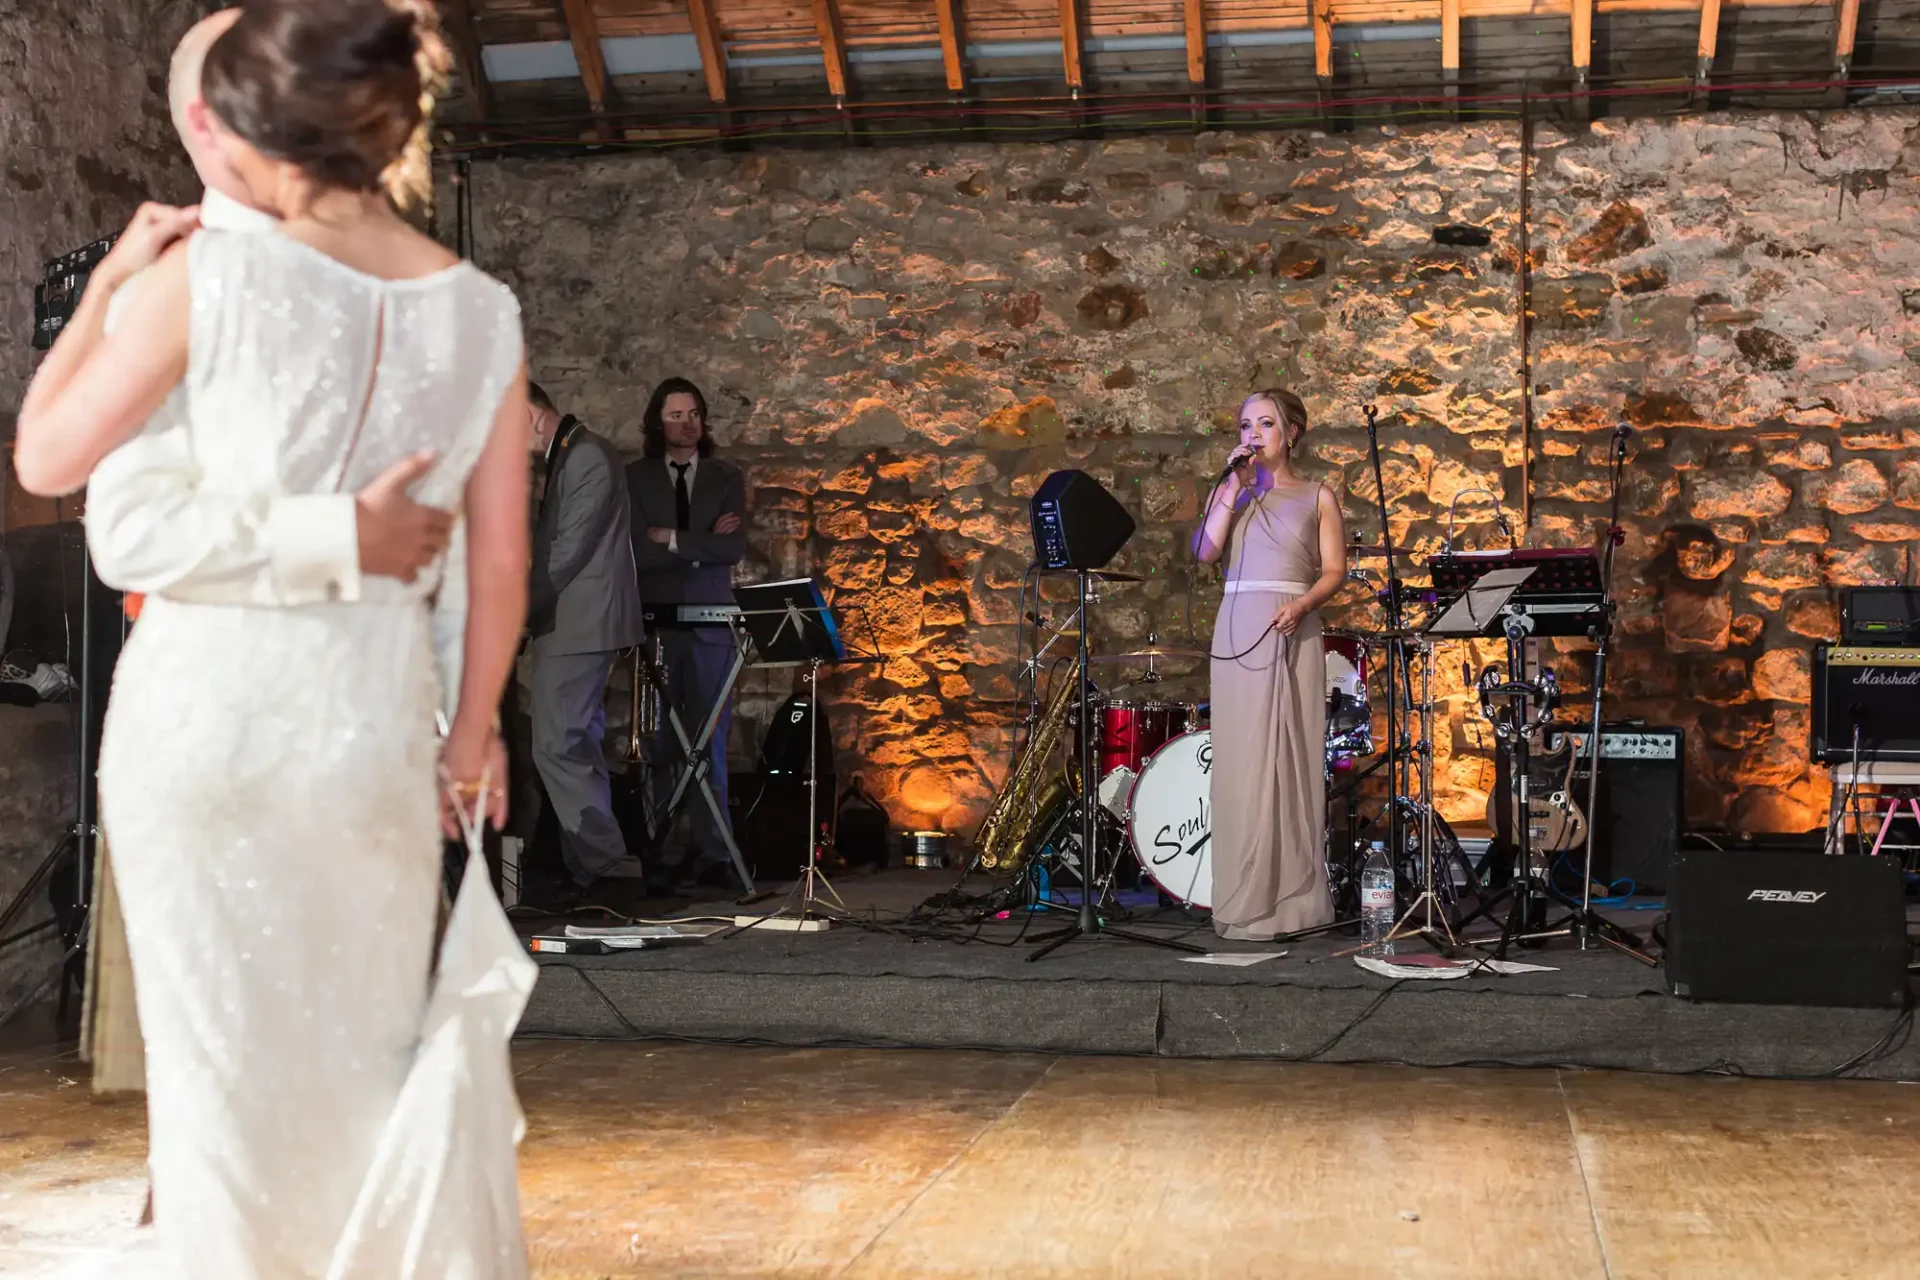 A bride listens to a female singer performing with a band in a rustic venue with stone walls.